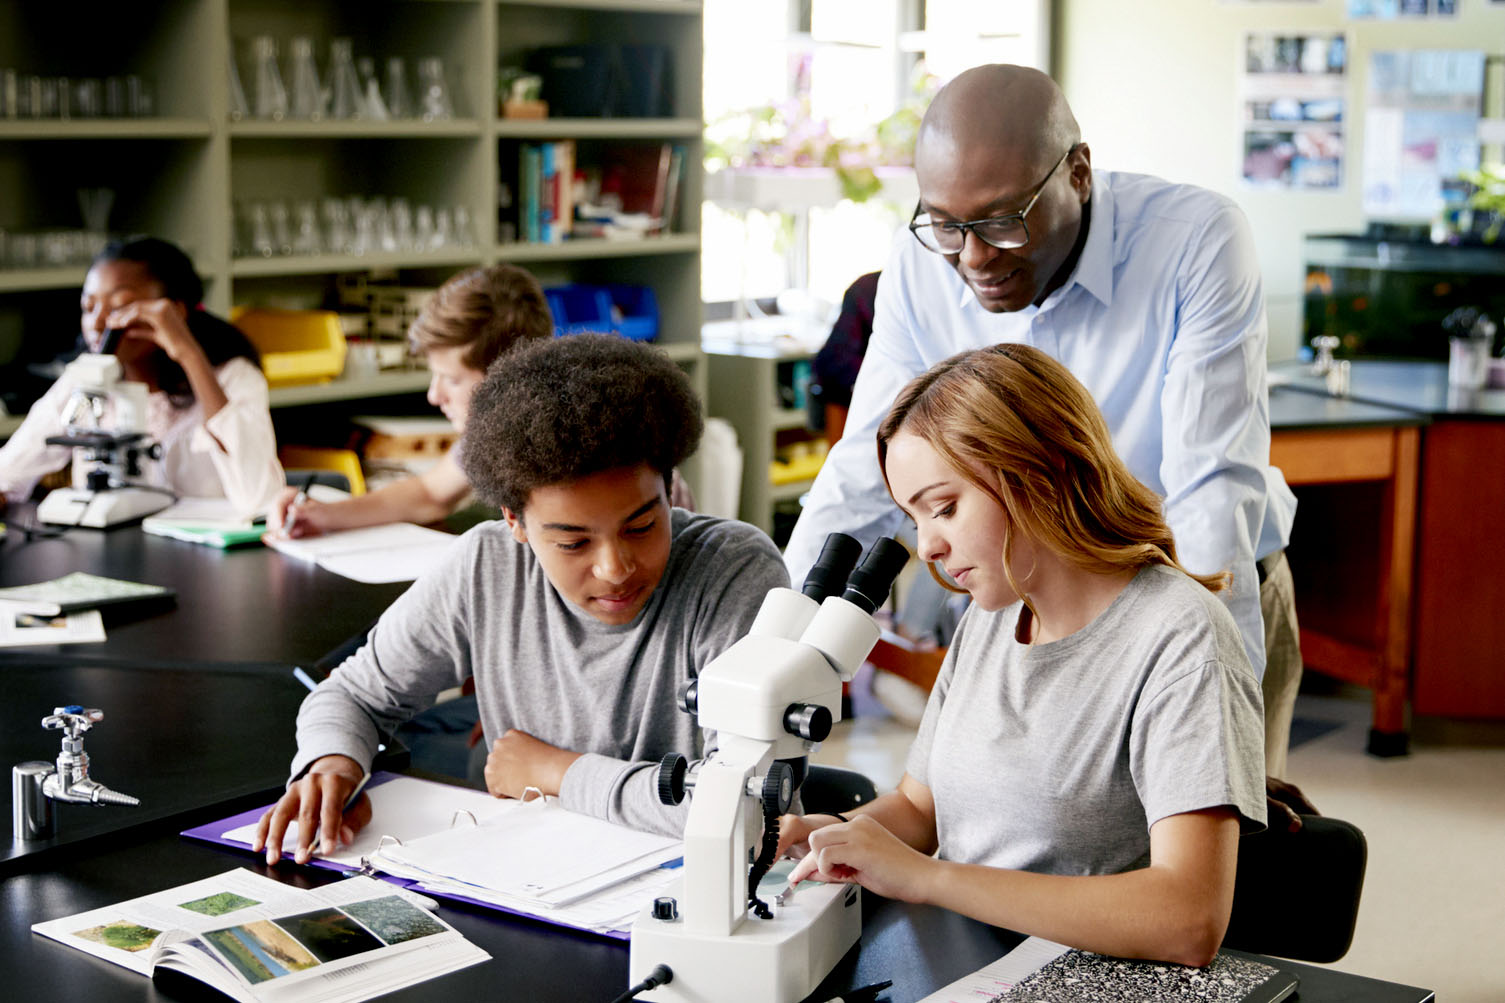 Teacher standing with two students as they work with a microscope